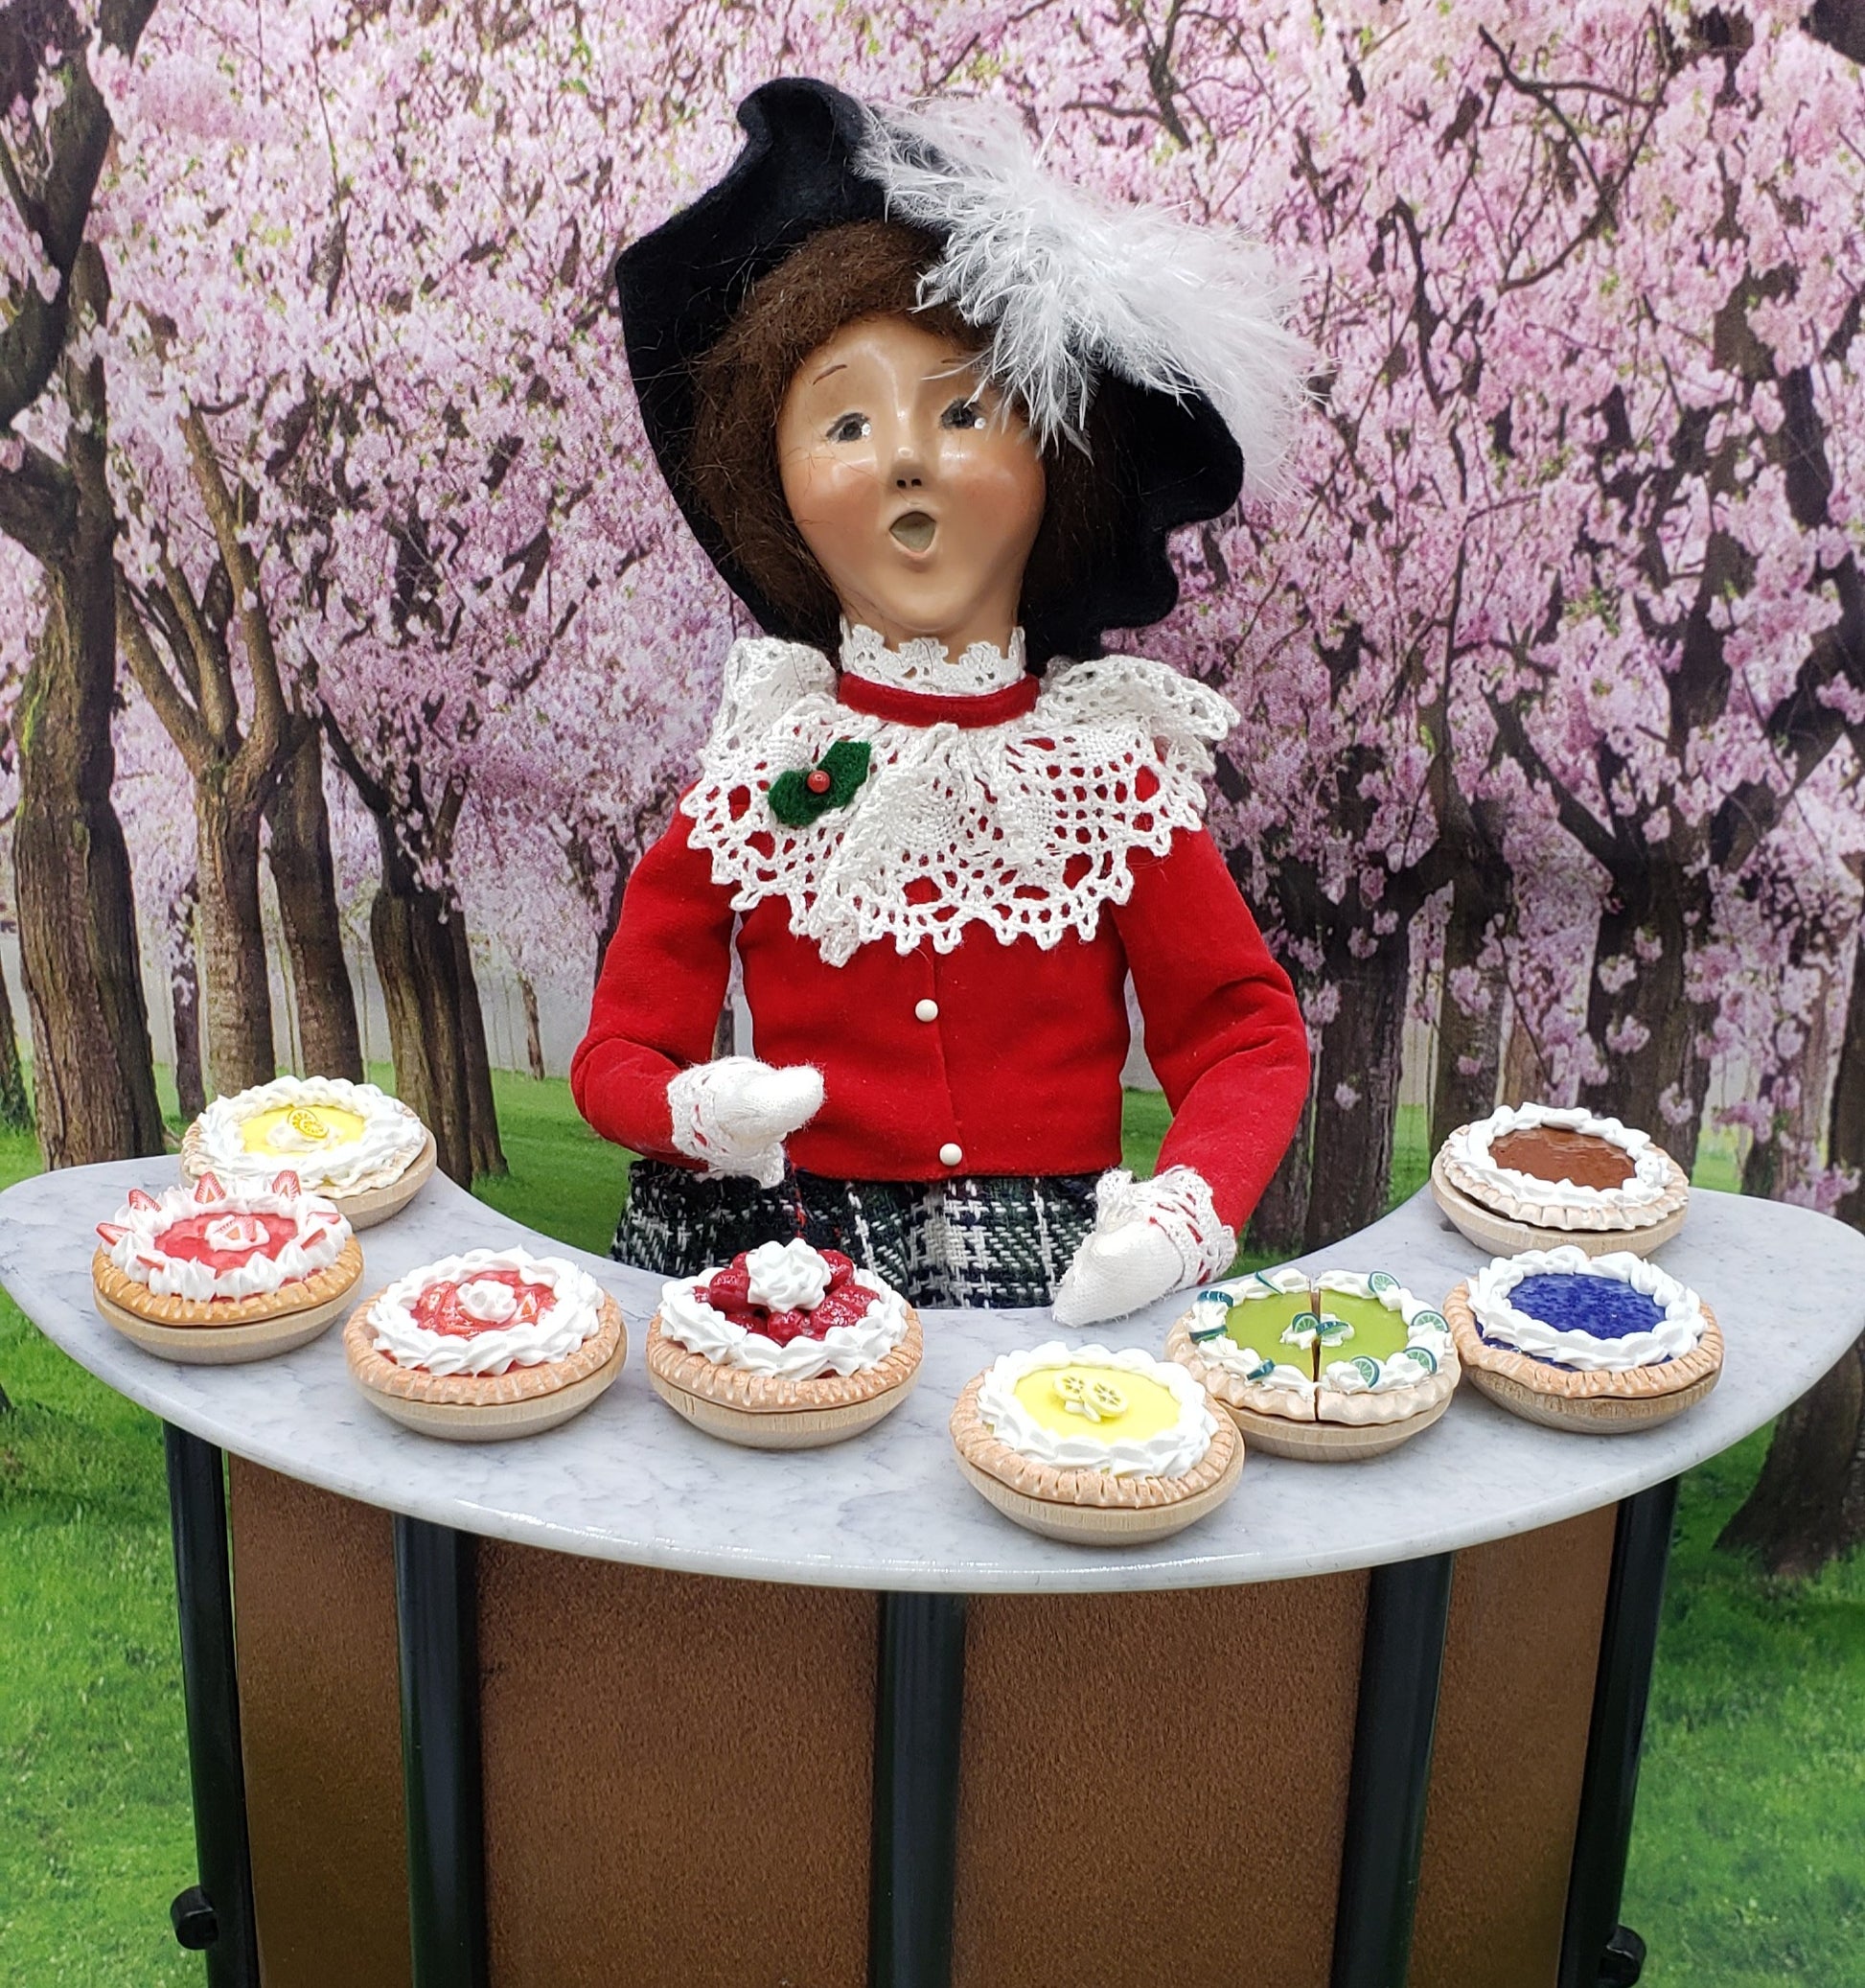 Byers choice dolls with pies